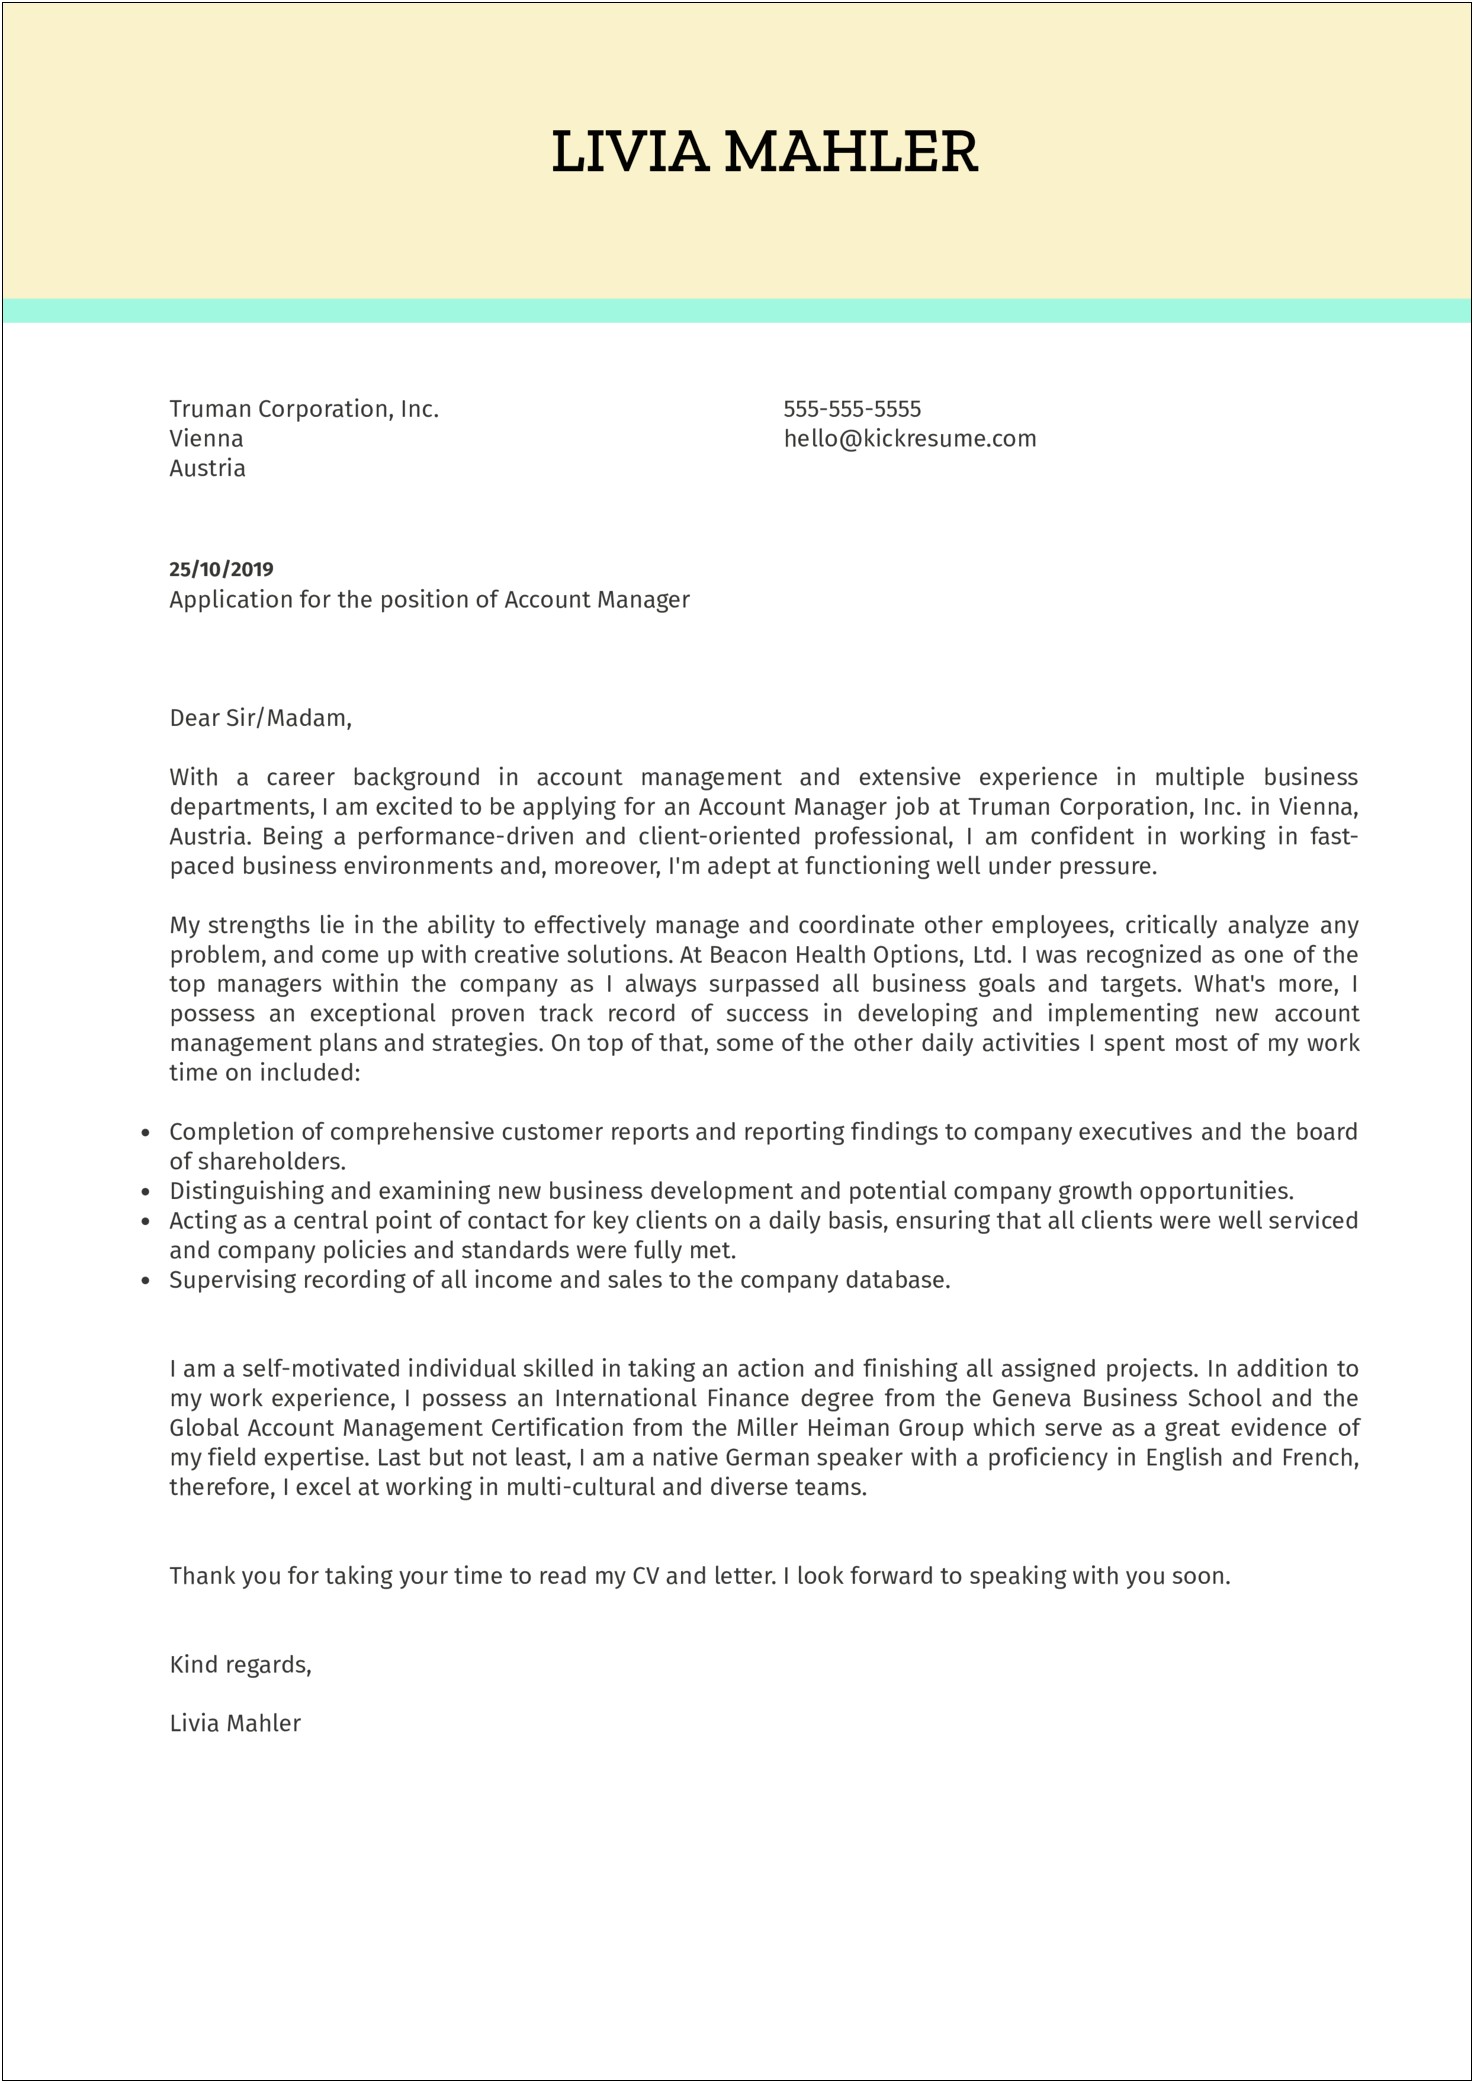 Professional Cover Letter For Resume My Strengths Lie